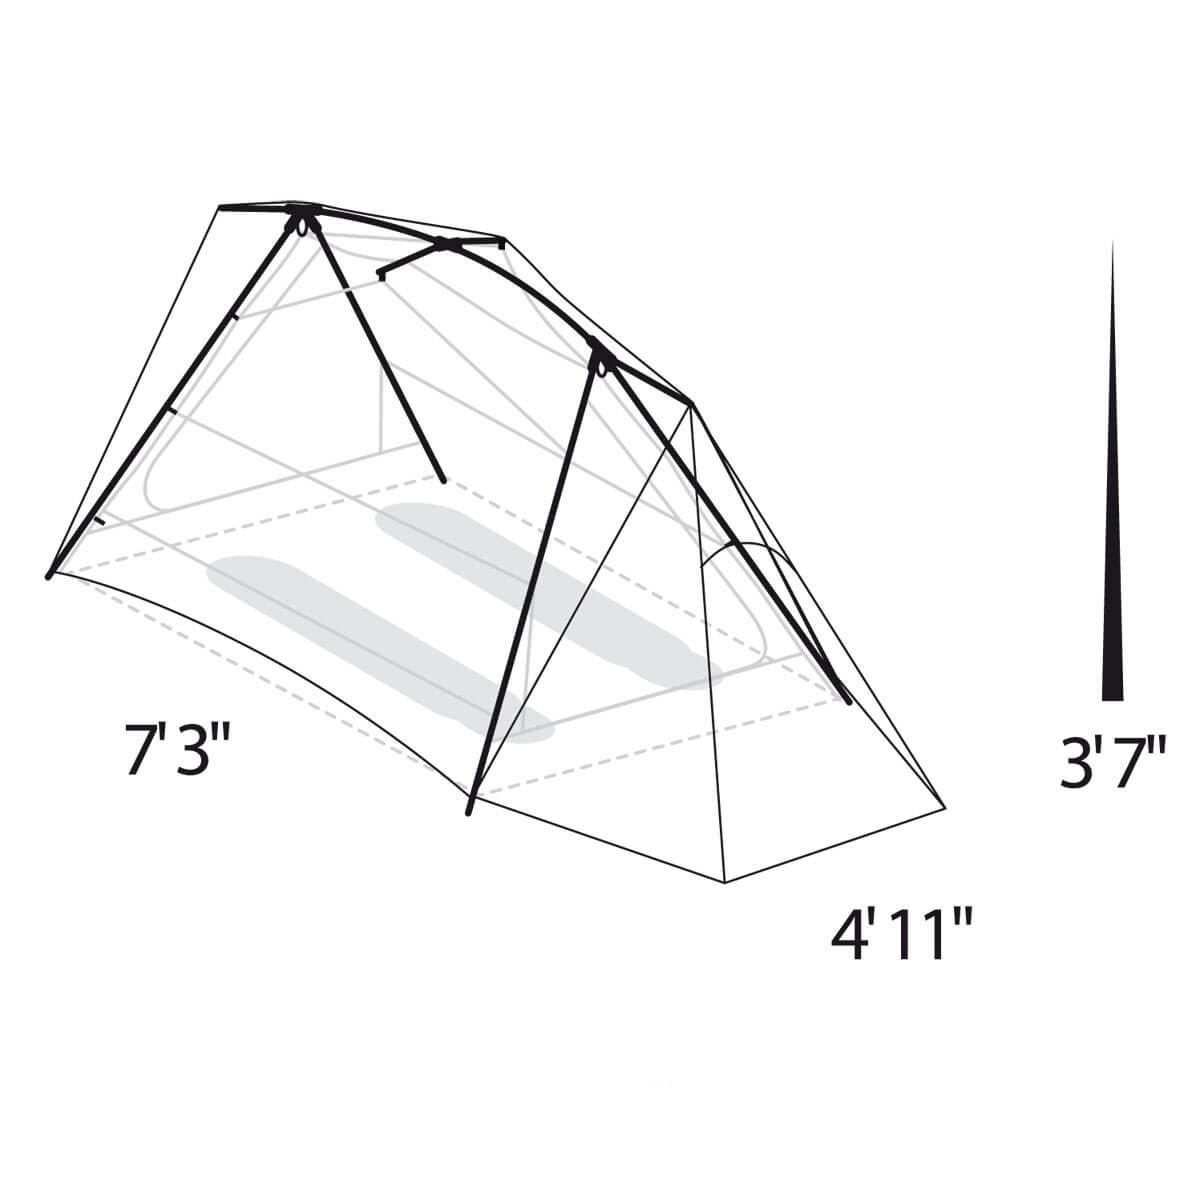 Eureka Timberline SQ 2XT 3 season two person backpacking tent dimensions